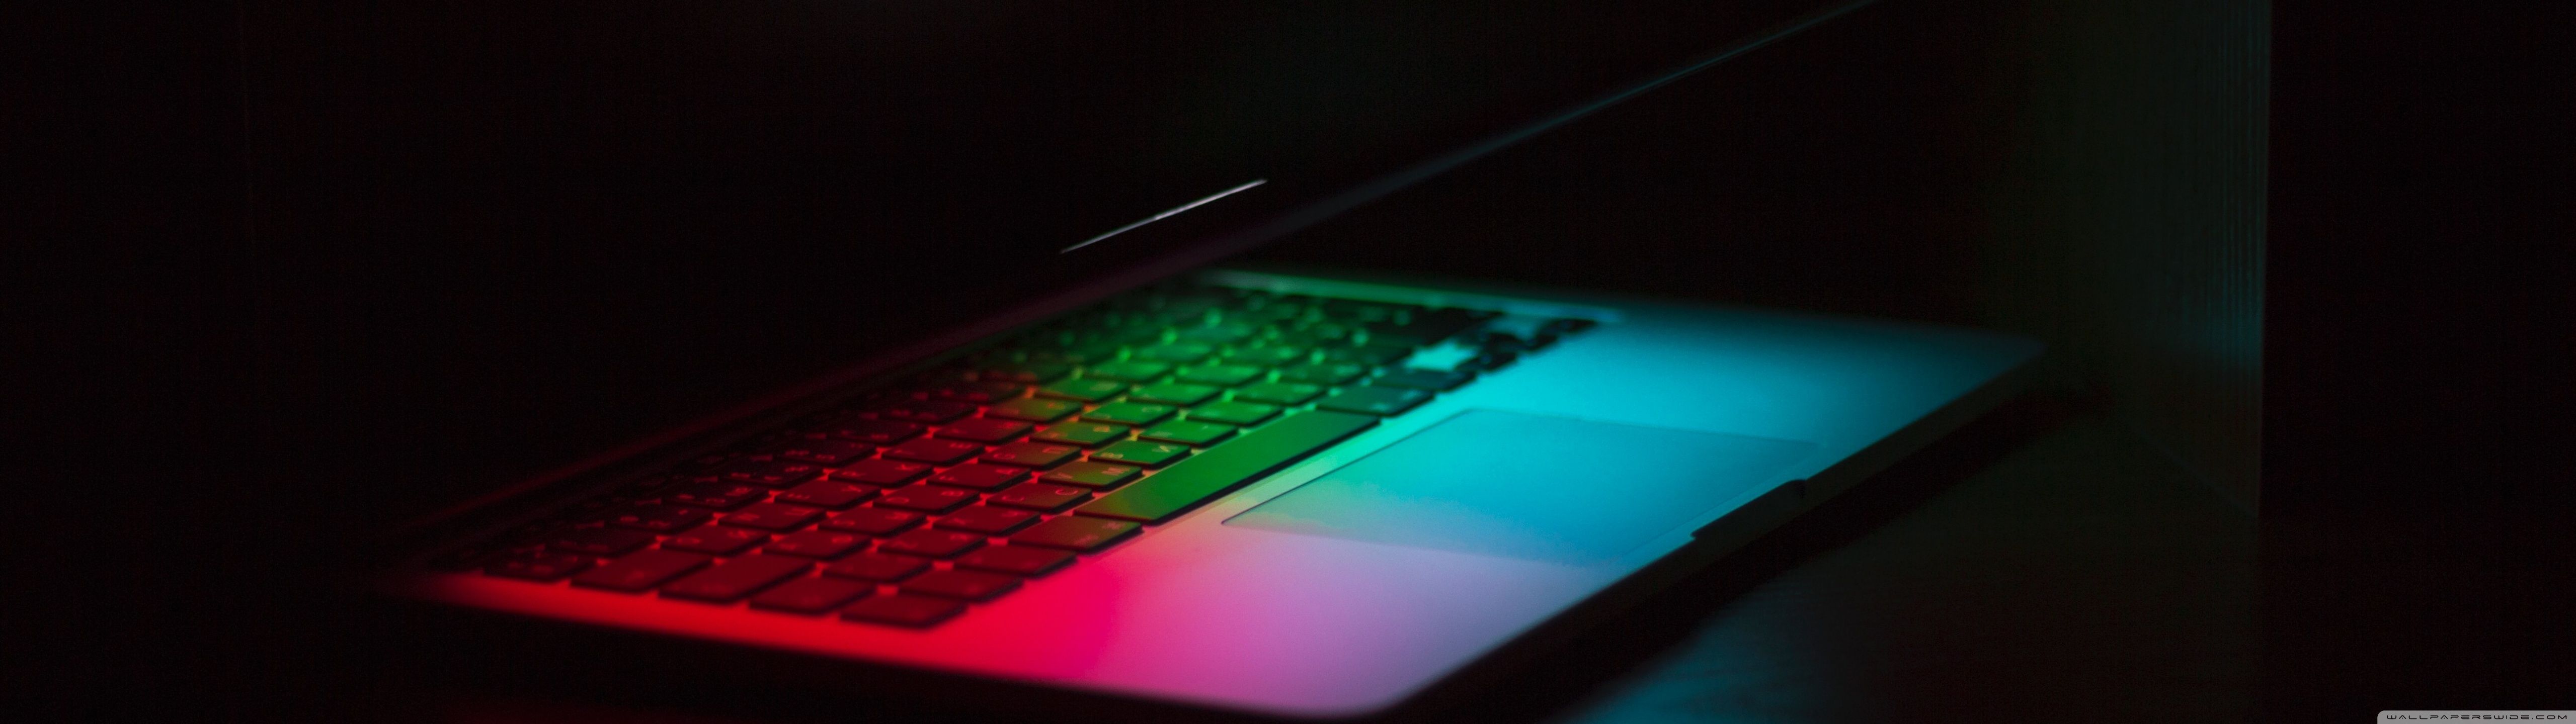 A laptop with a colorful keyboard - 5120x1440